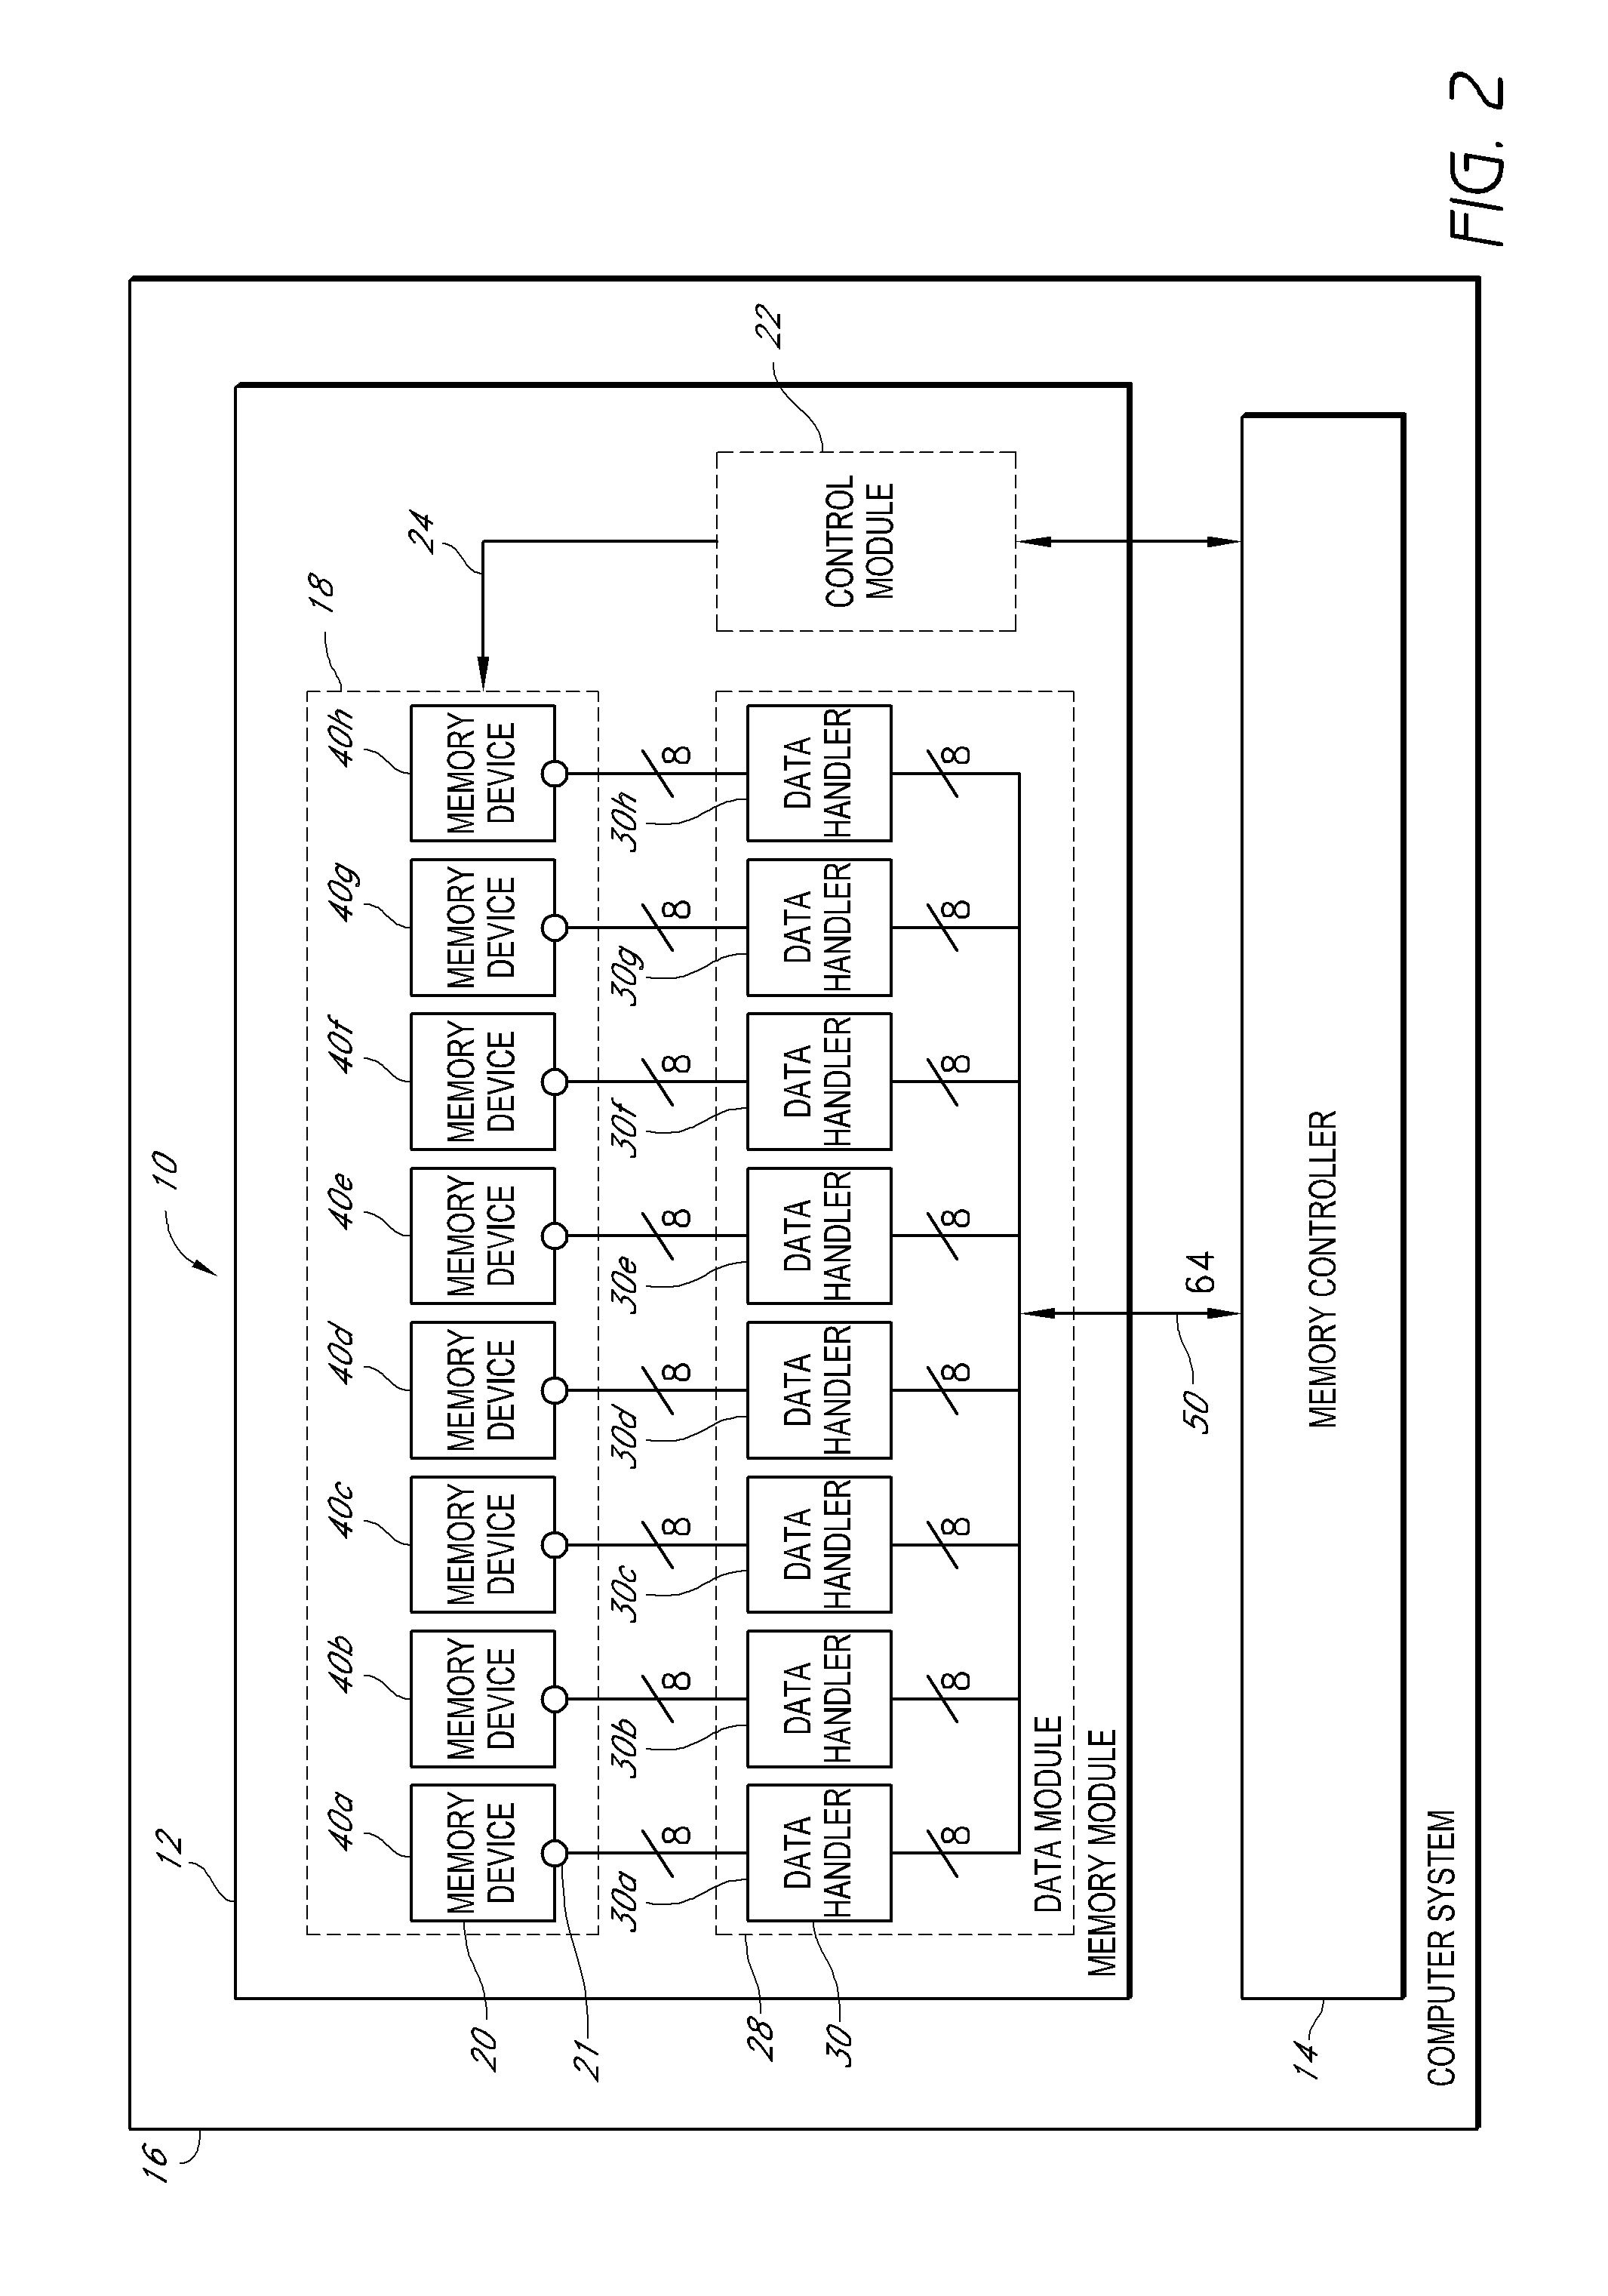 Memory board with self-testing capability